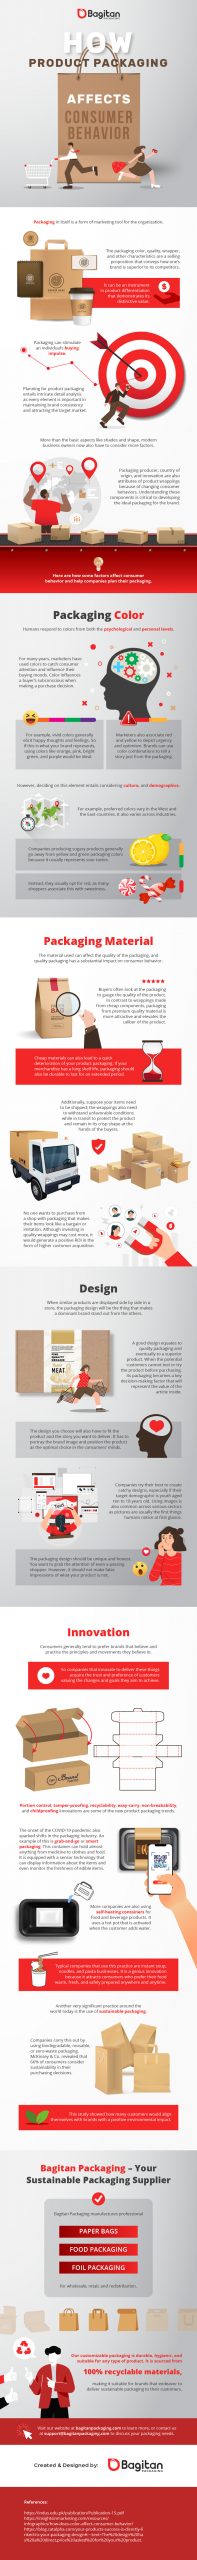 how product packaging affects consumer behavior infographic